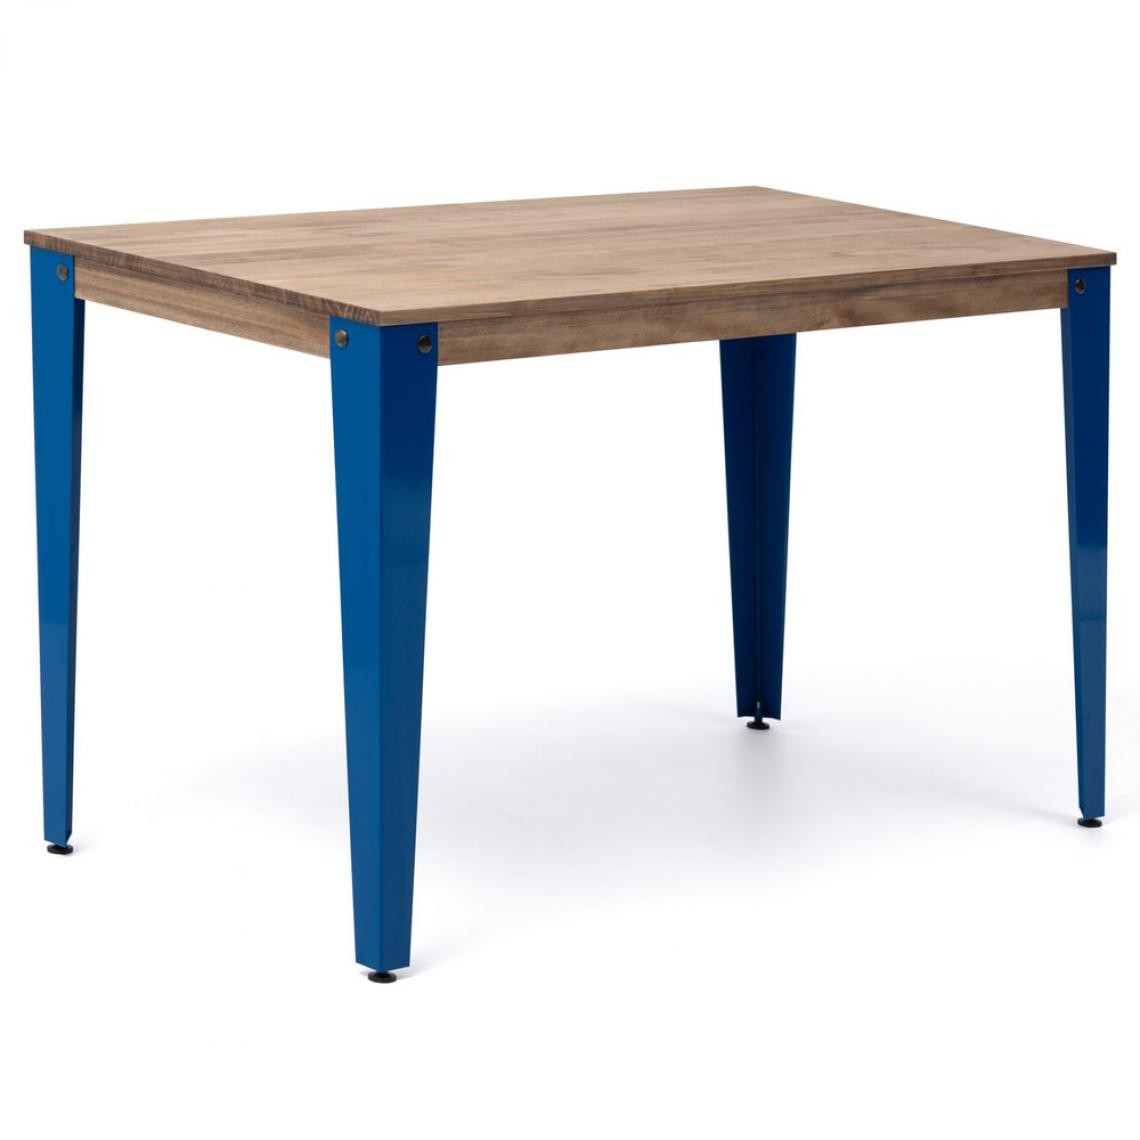 BOX FURNITURE - Table Salle a Manger Lunds 160x90x75cm Bleu-Vieilli Box Furniture - Tables à manger